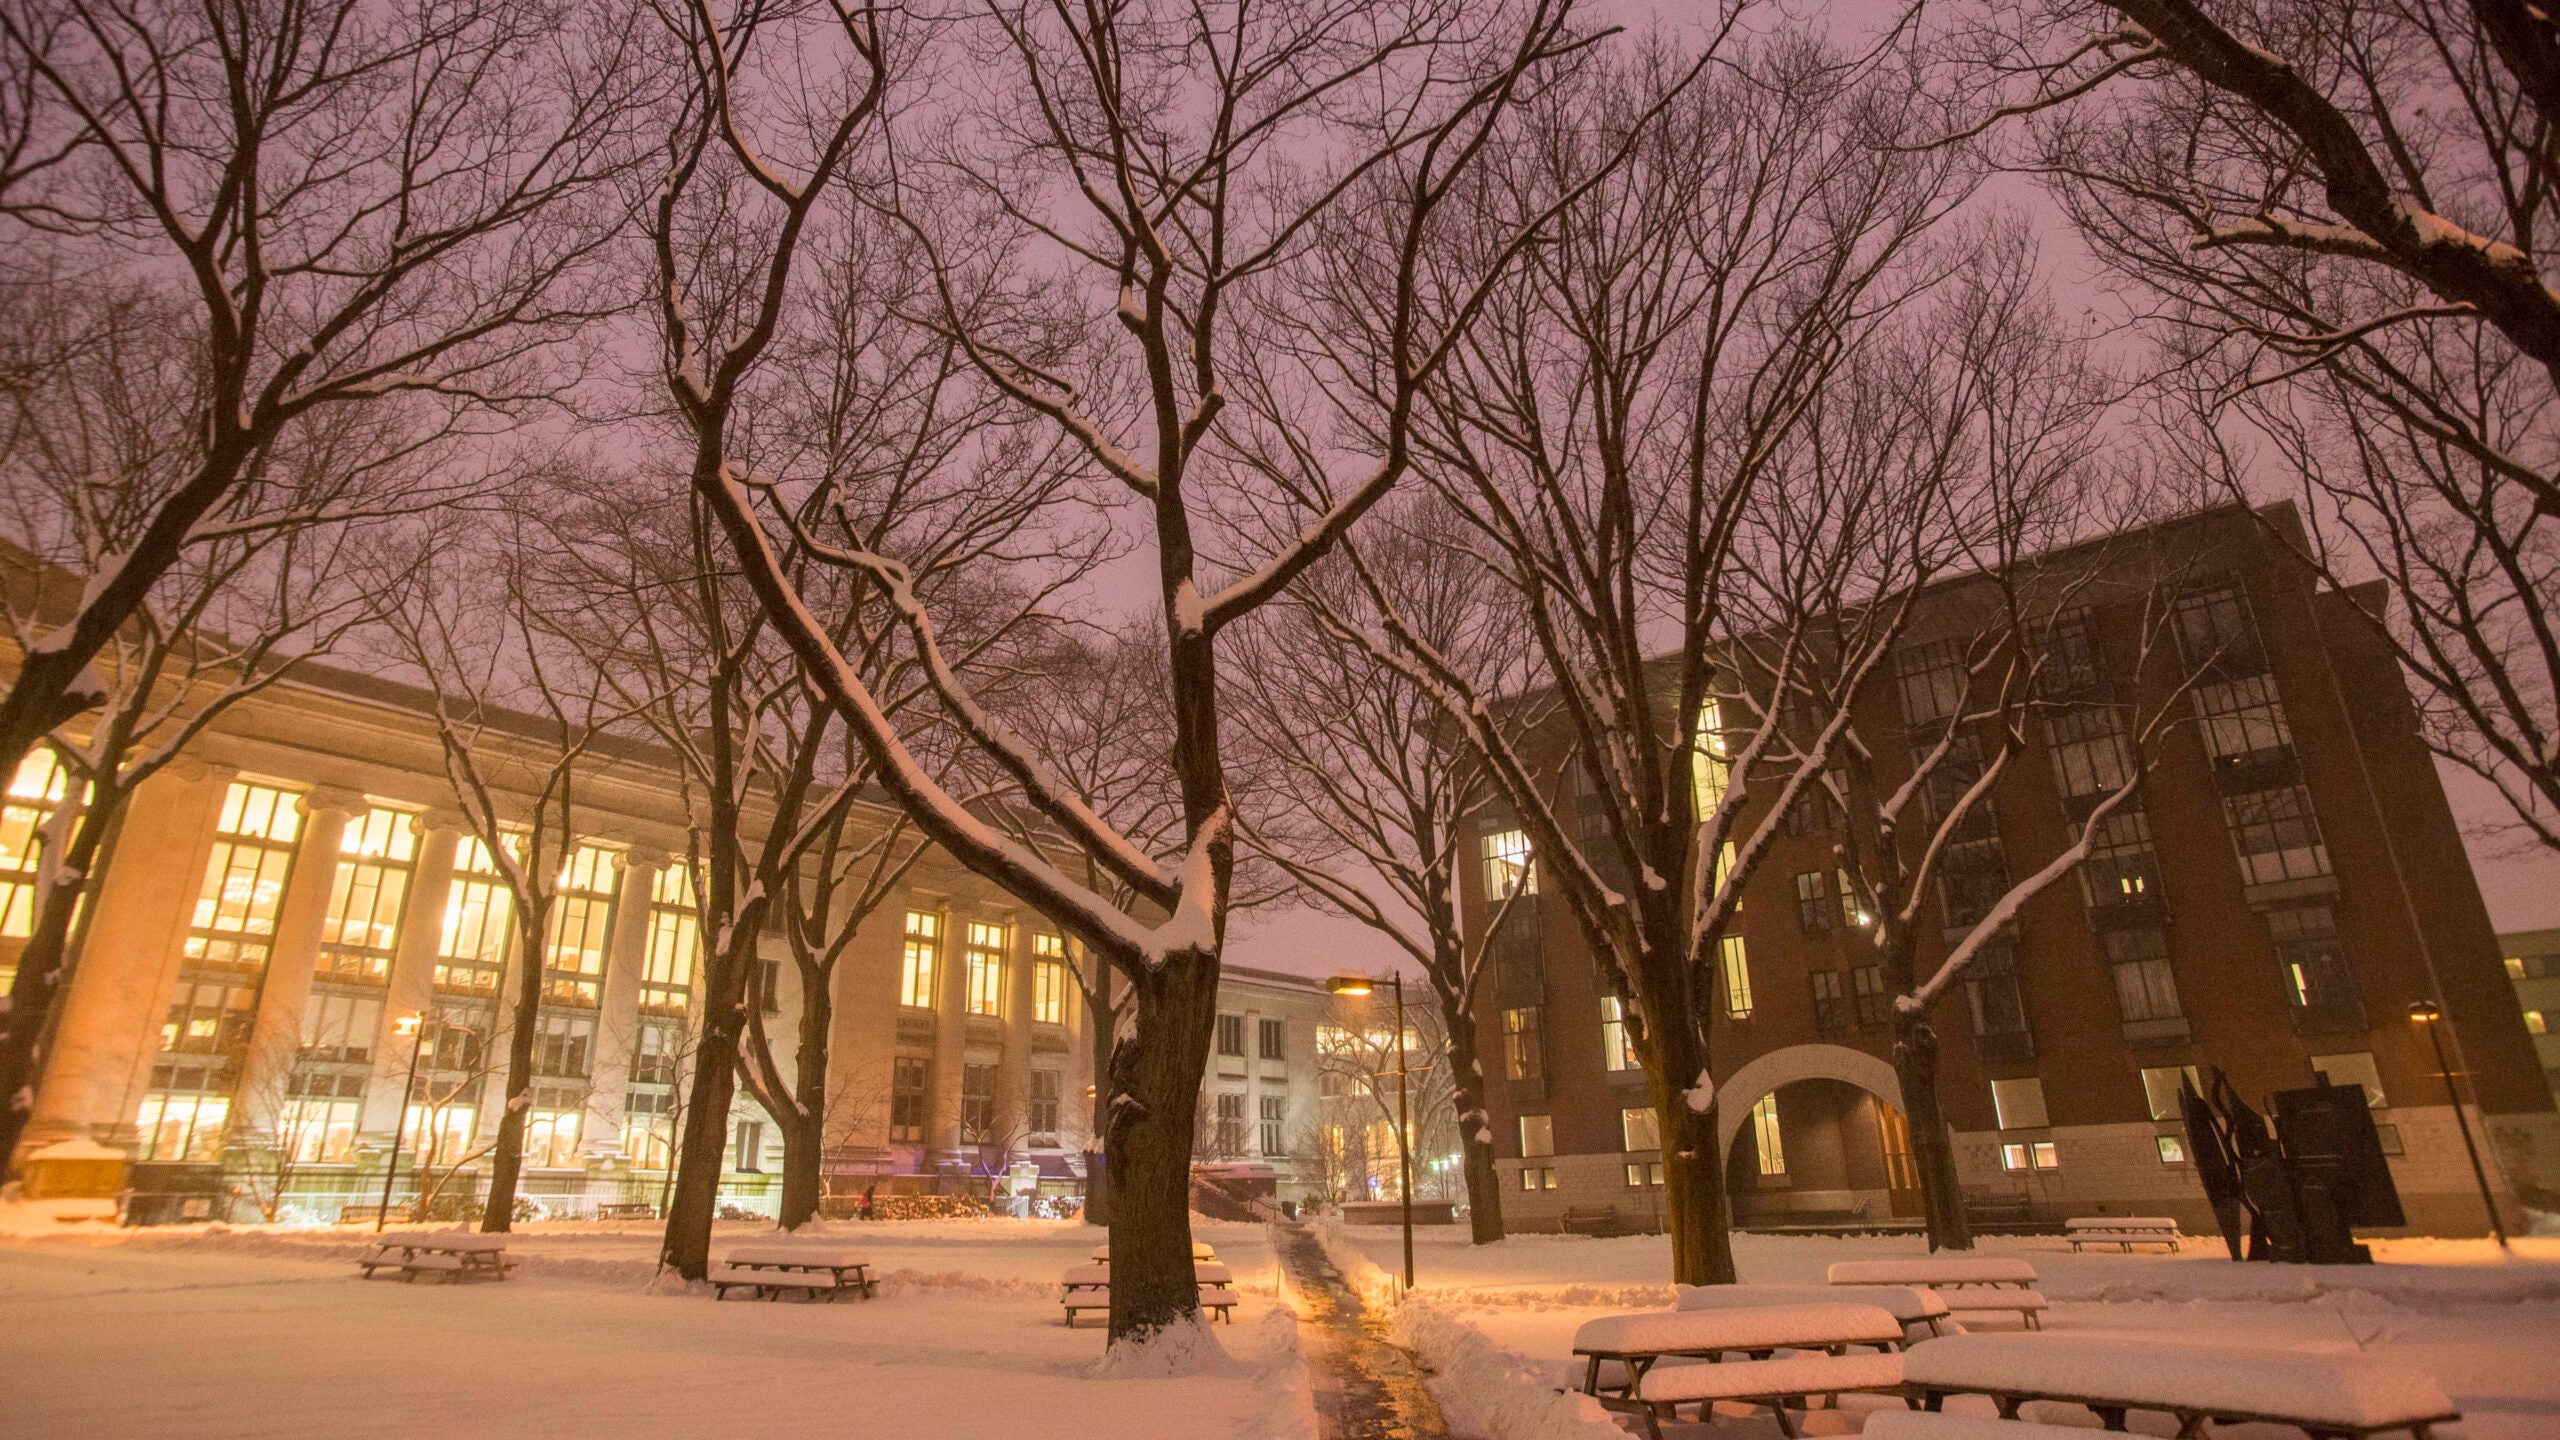 A wide shot of a campus quad in winter at night